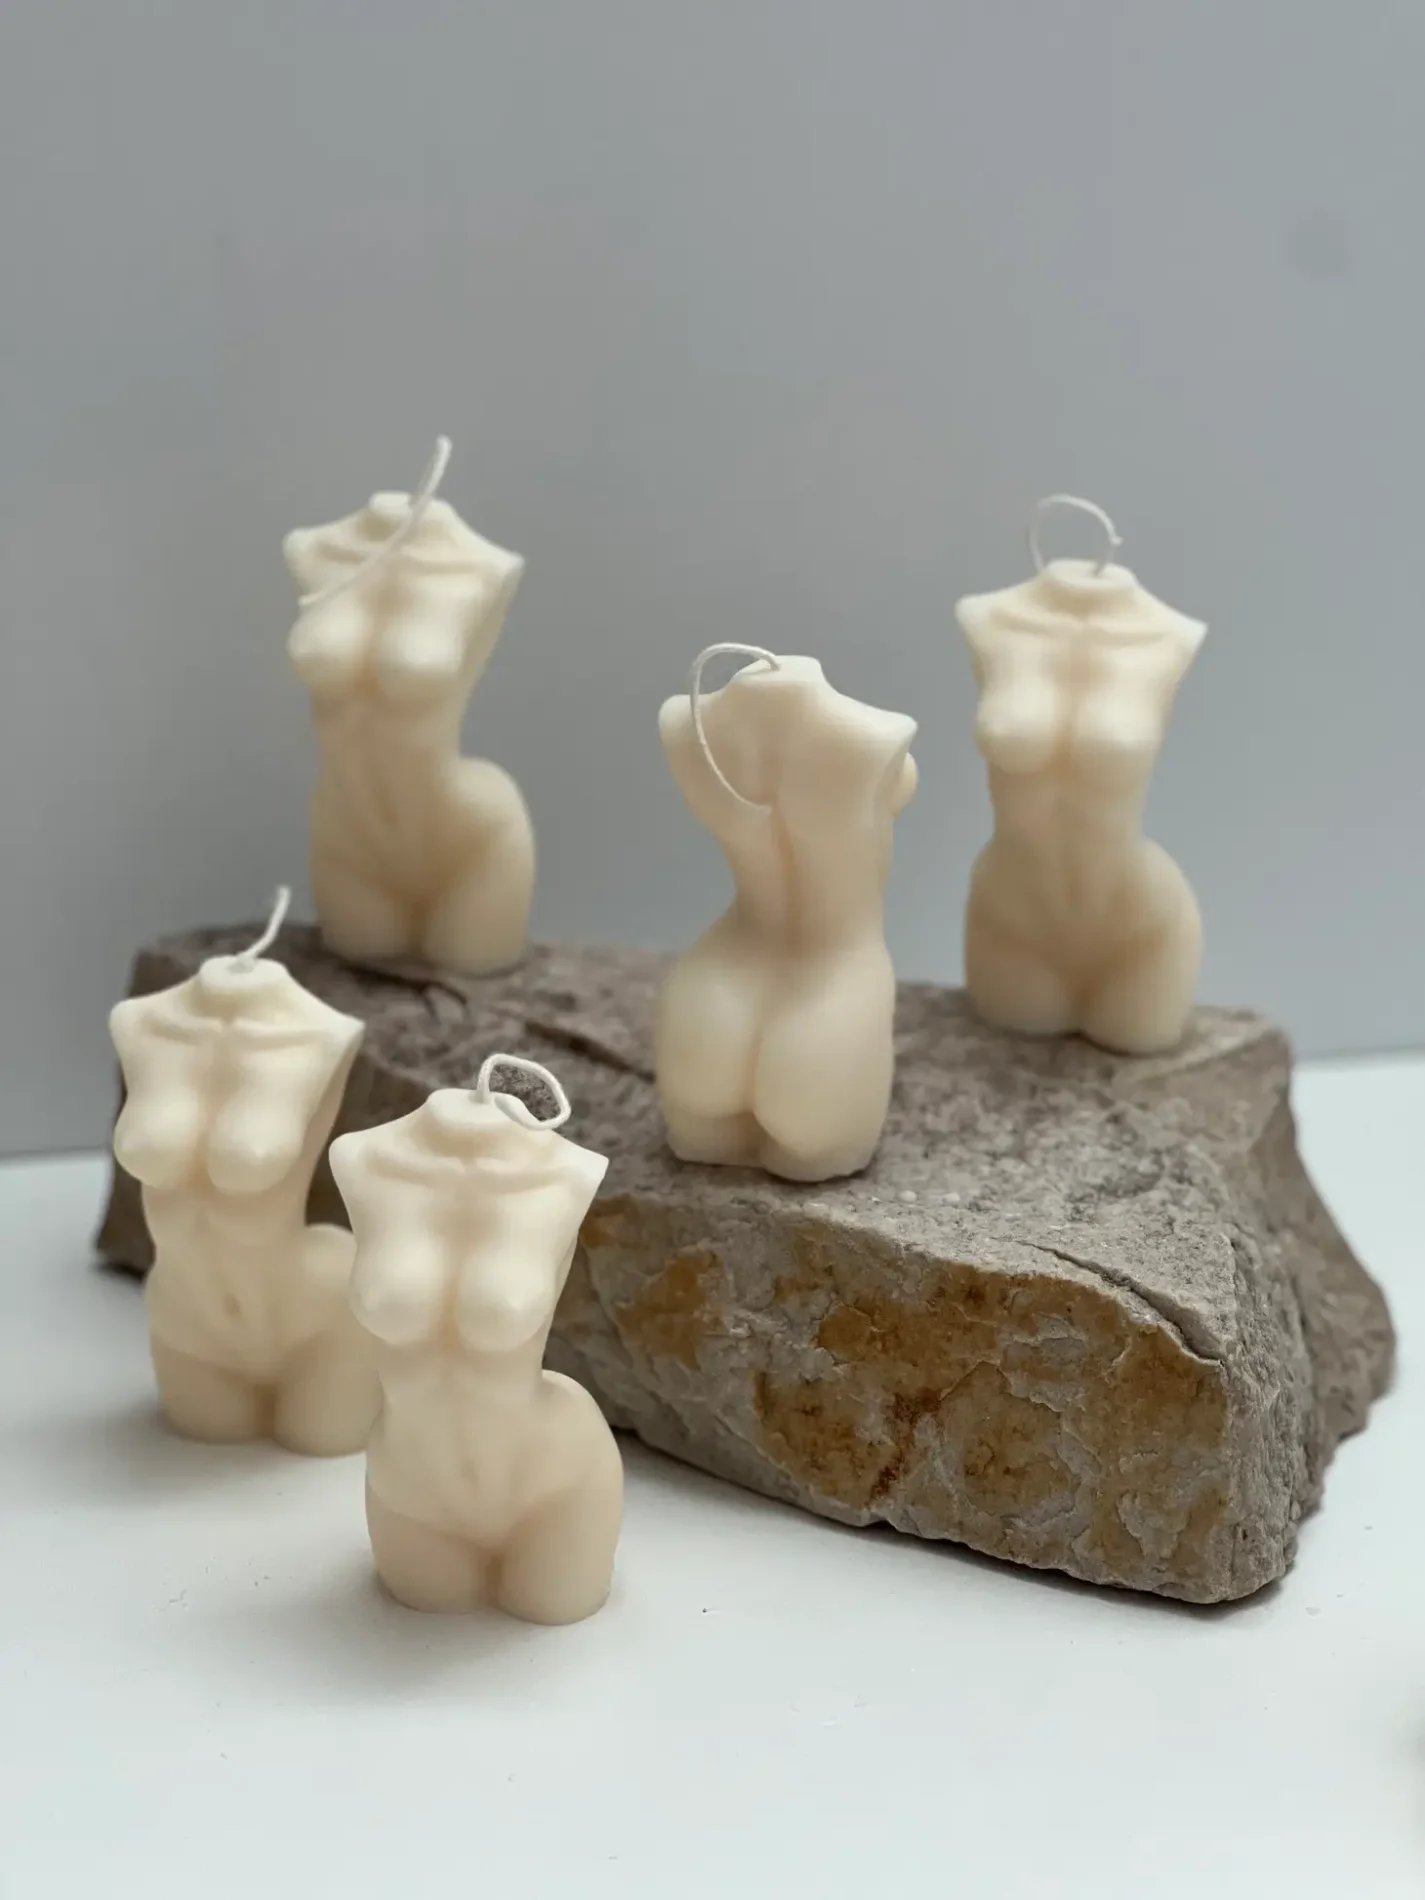 Female body candle, home decor, soy wax